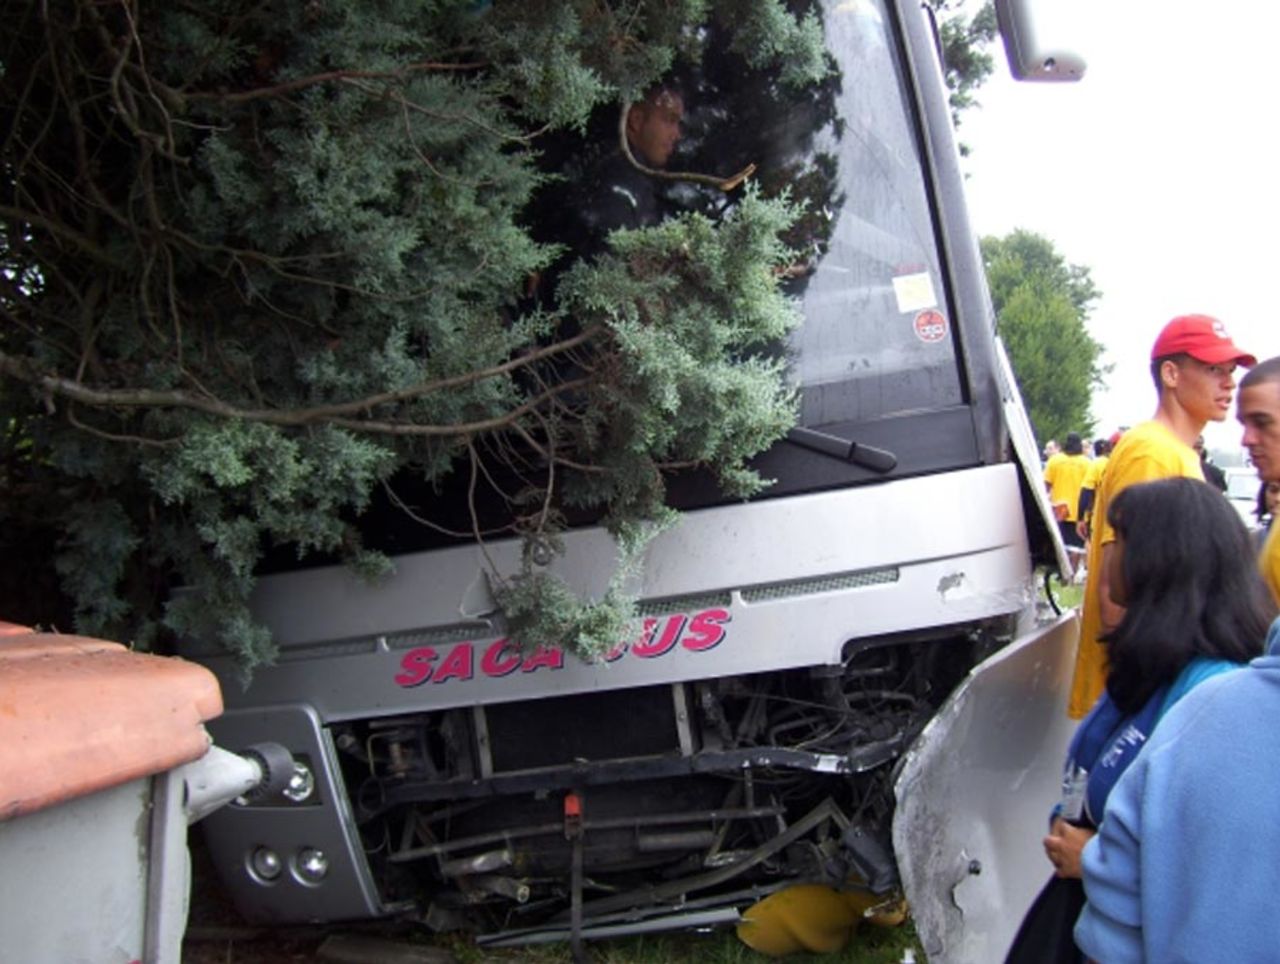 The bus carrying the Italy and Cayman Islands teams met with an accident, ICC World Cricket League Division 4, Bologna, August 14, 2010